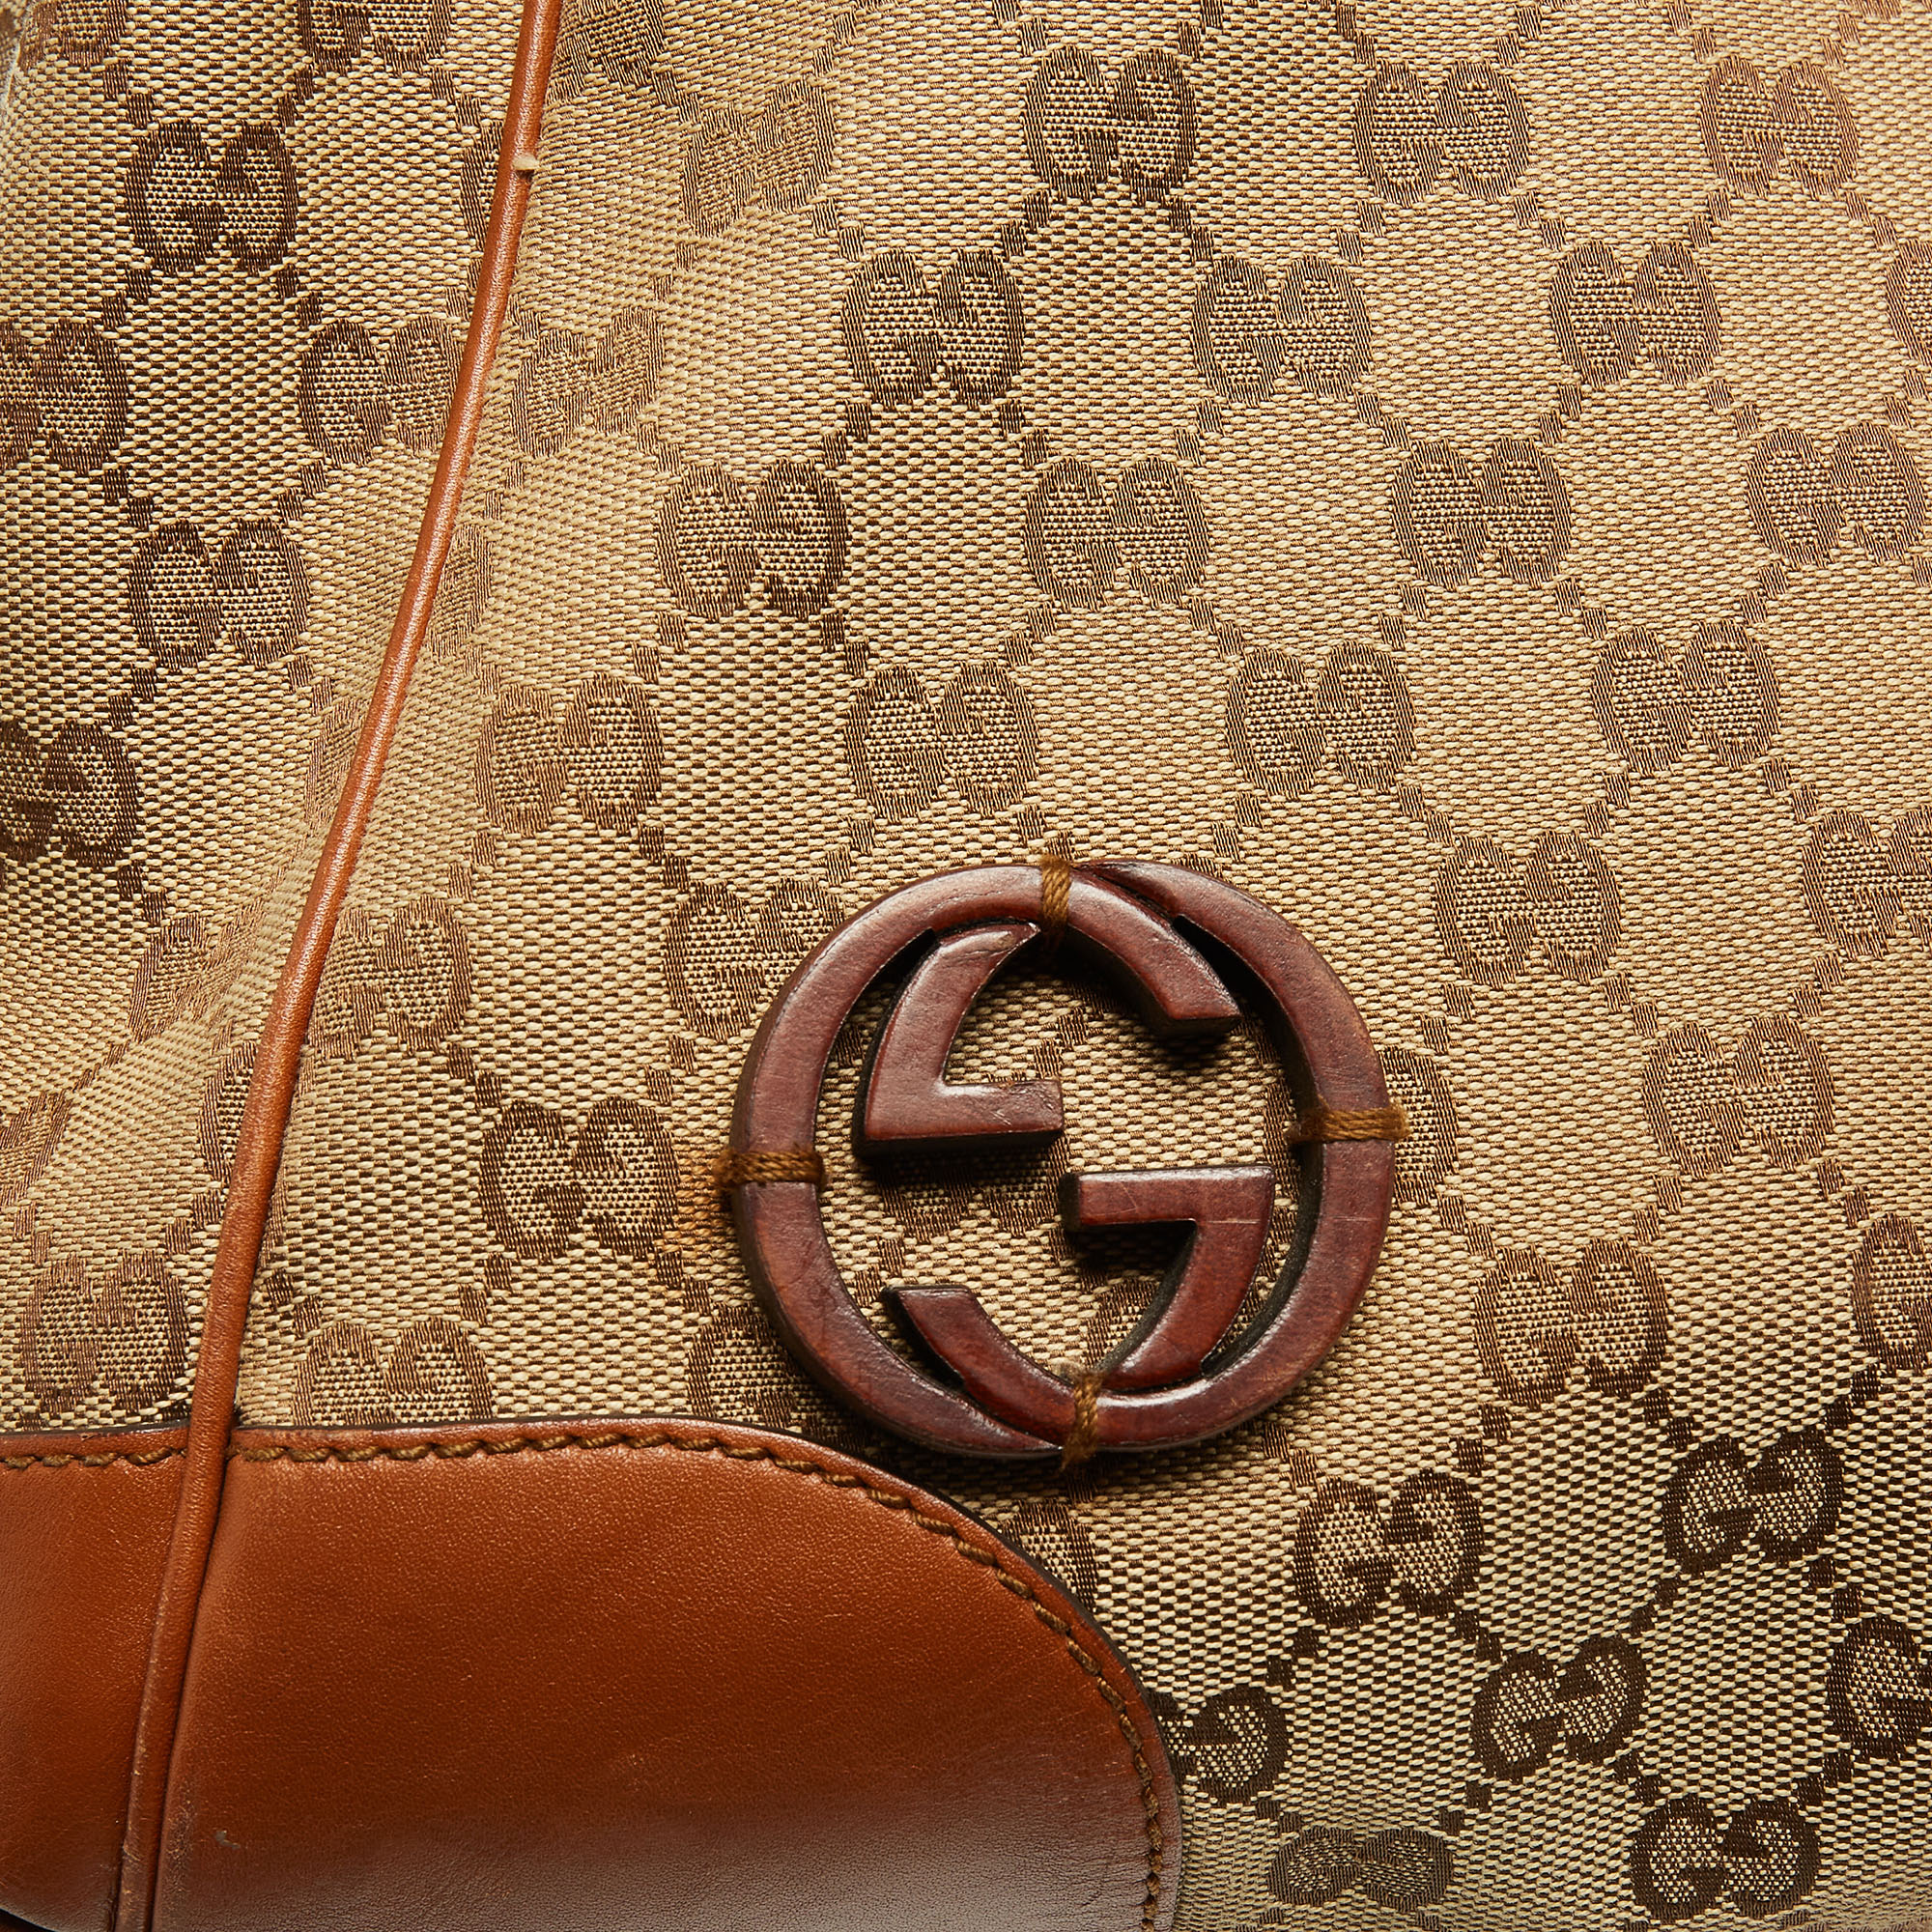 Gucci Beige/Brown GG Canvas And Leather Brick Lane Tote